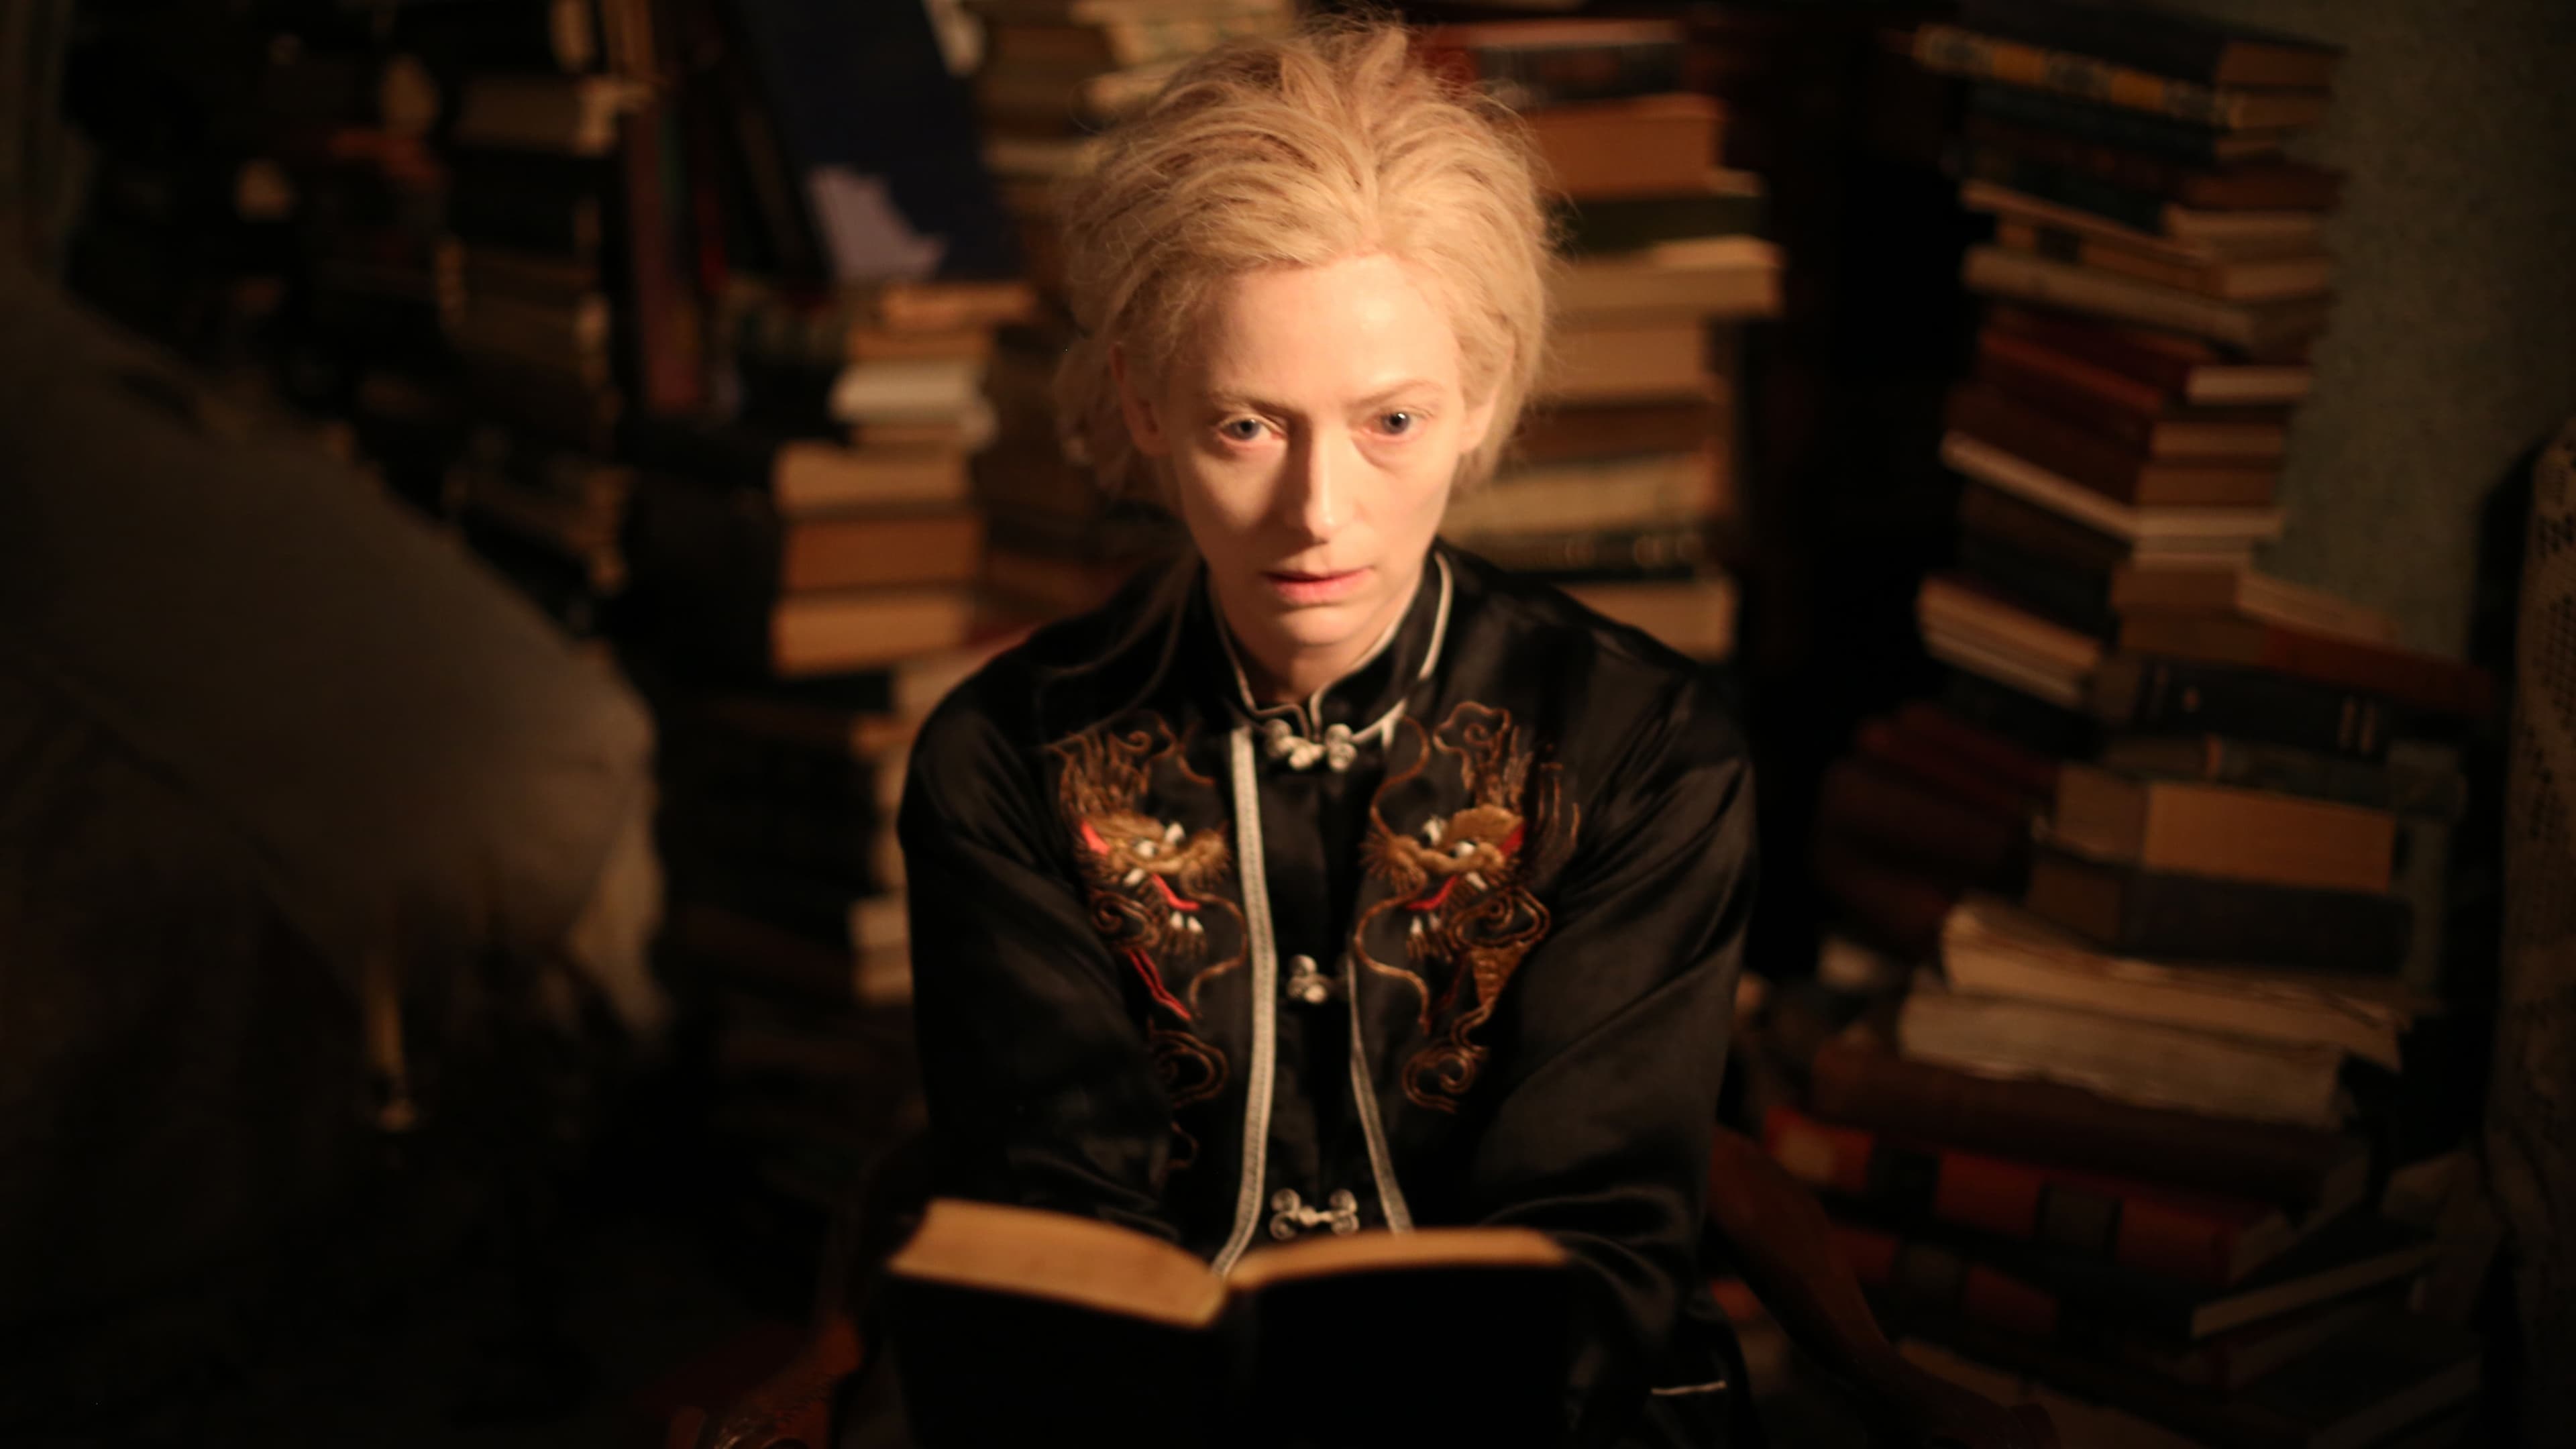 Only Lovers Left Alive Wallpapers (36+ images inside)